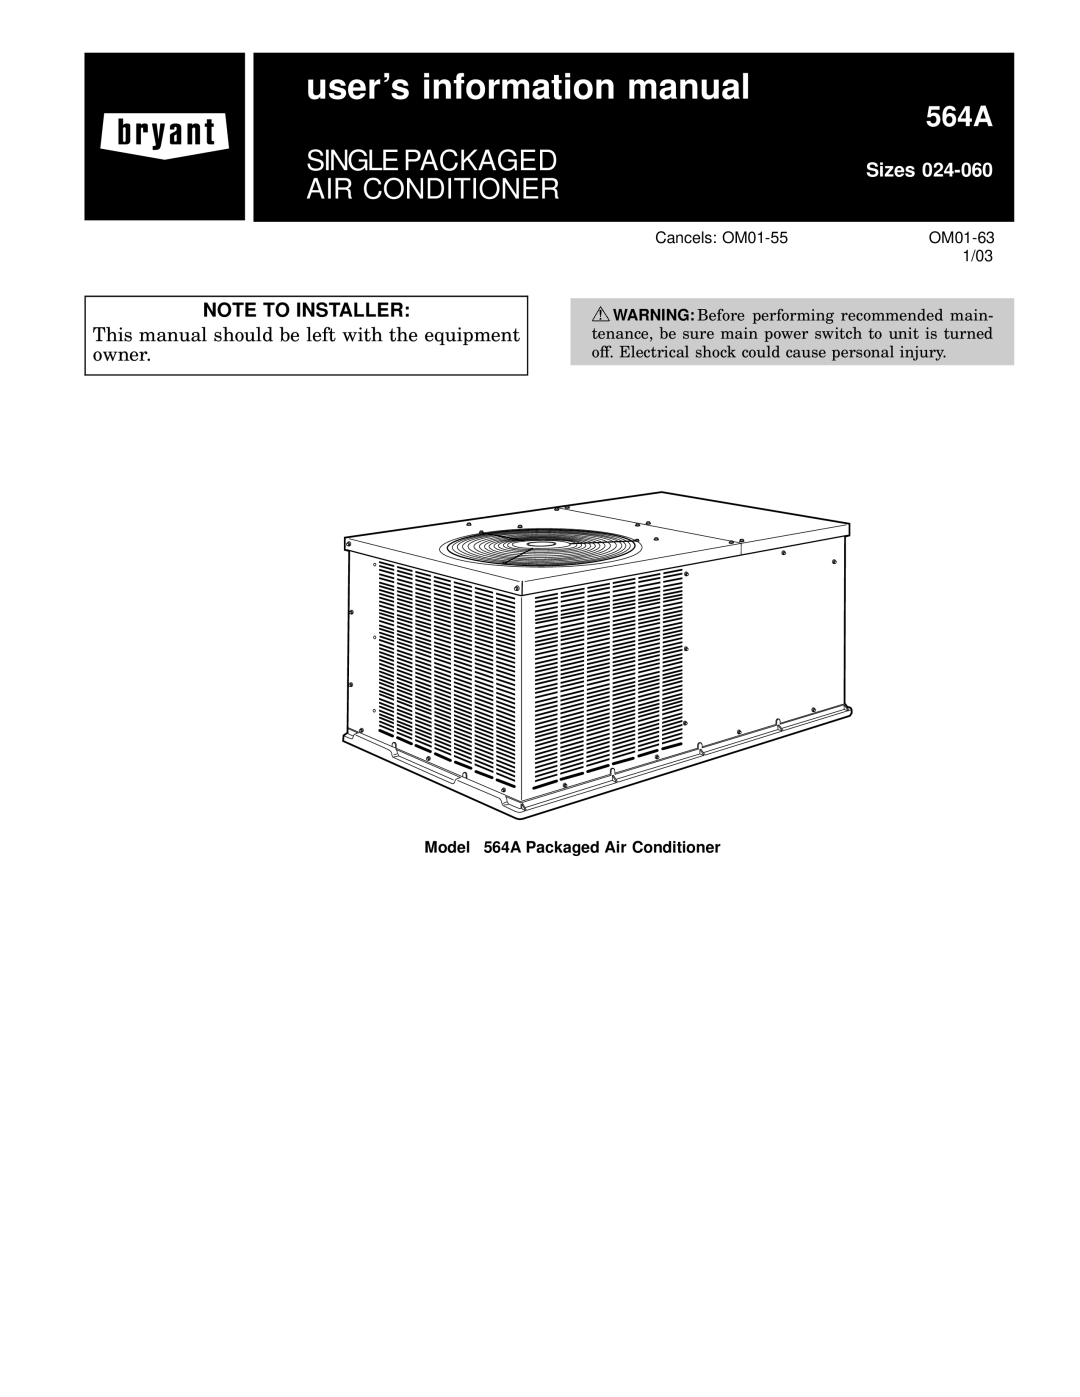 Bryant manual Cancels OM01-55, OM01-63, 1/03, Model 564A Packaged Air Conditioner, users information manual, Sizes 